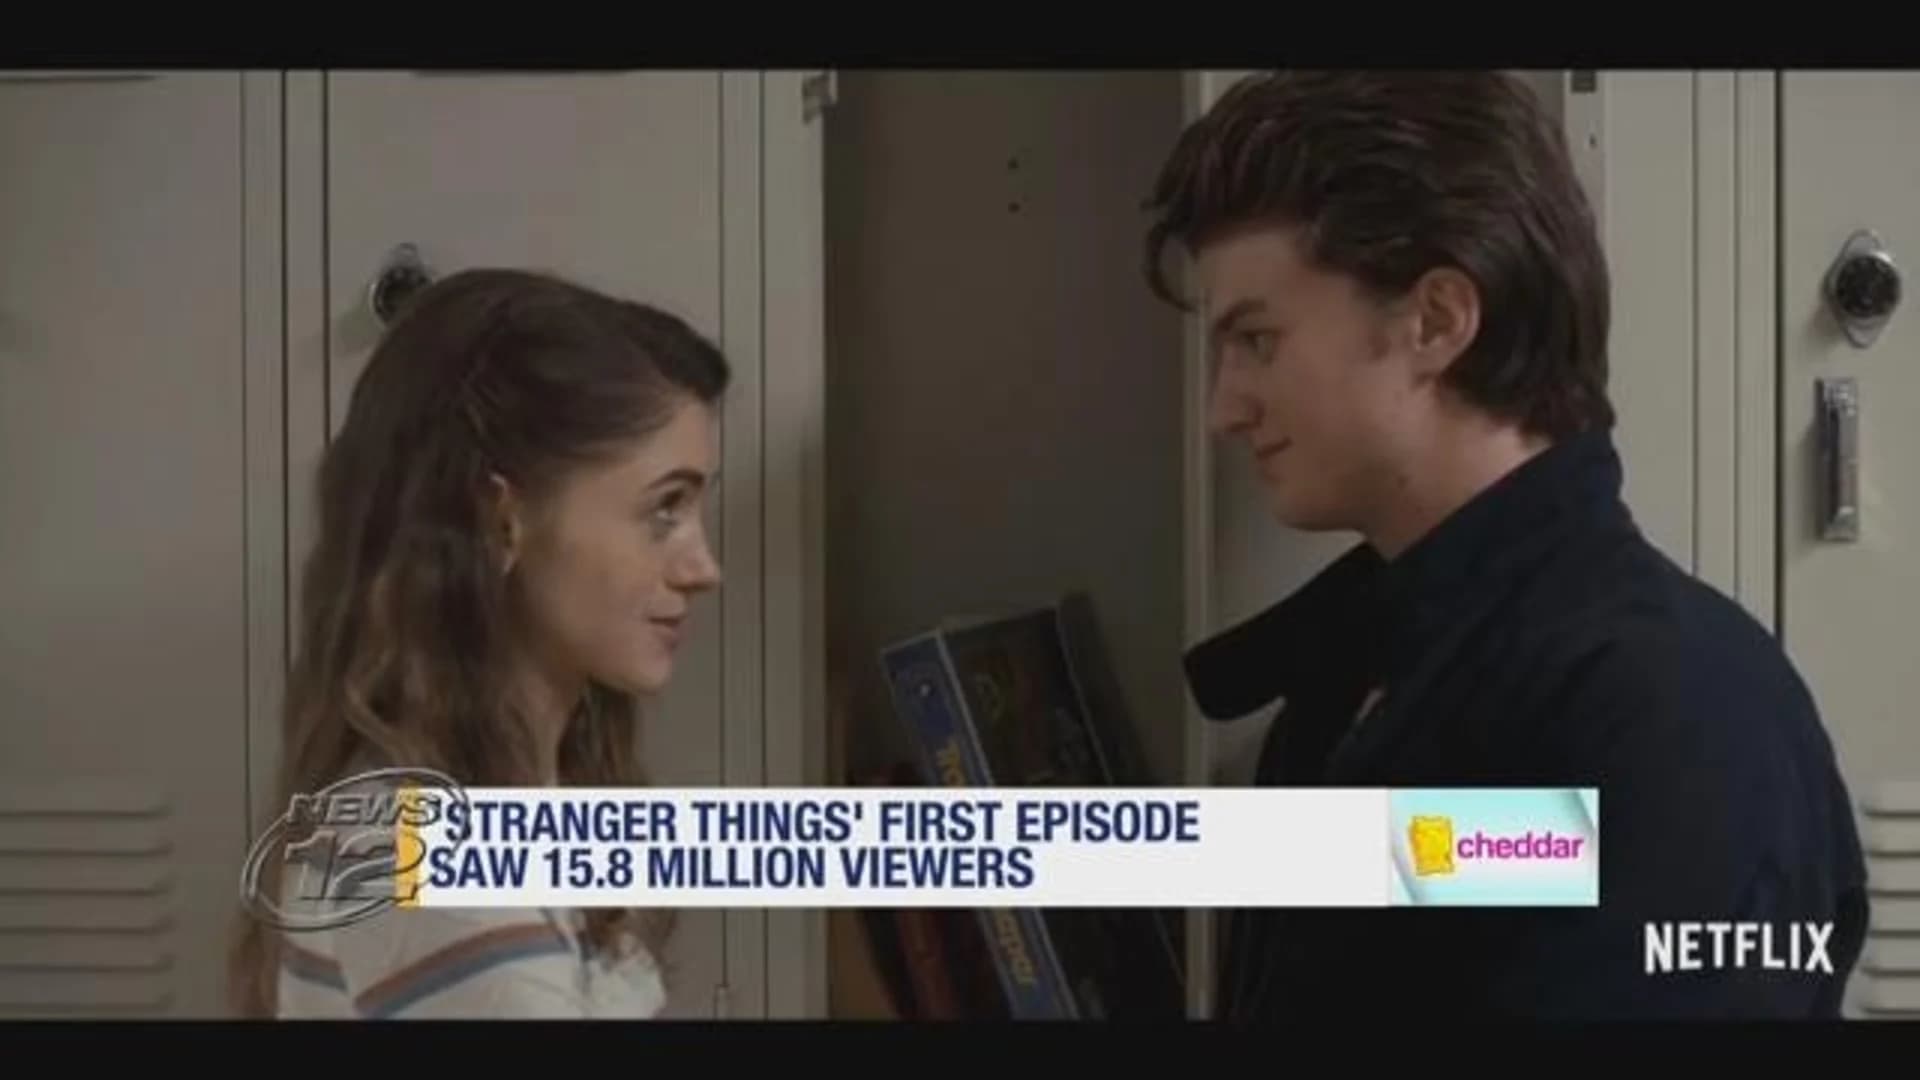 Cheddar Afternoon Business Update 11/3: ‘Stranger Things’ boasts strong ratings